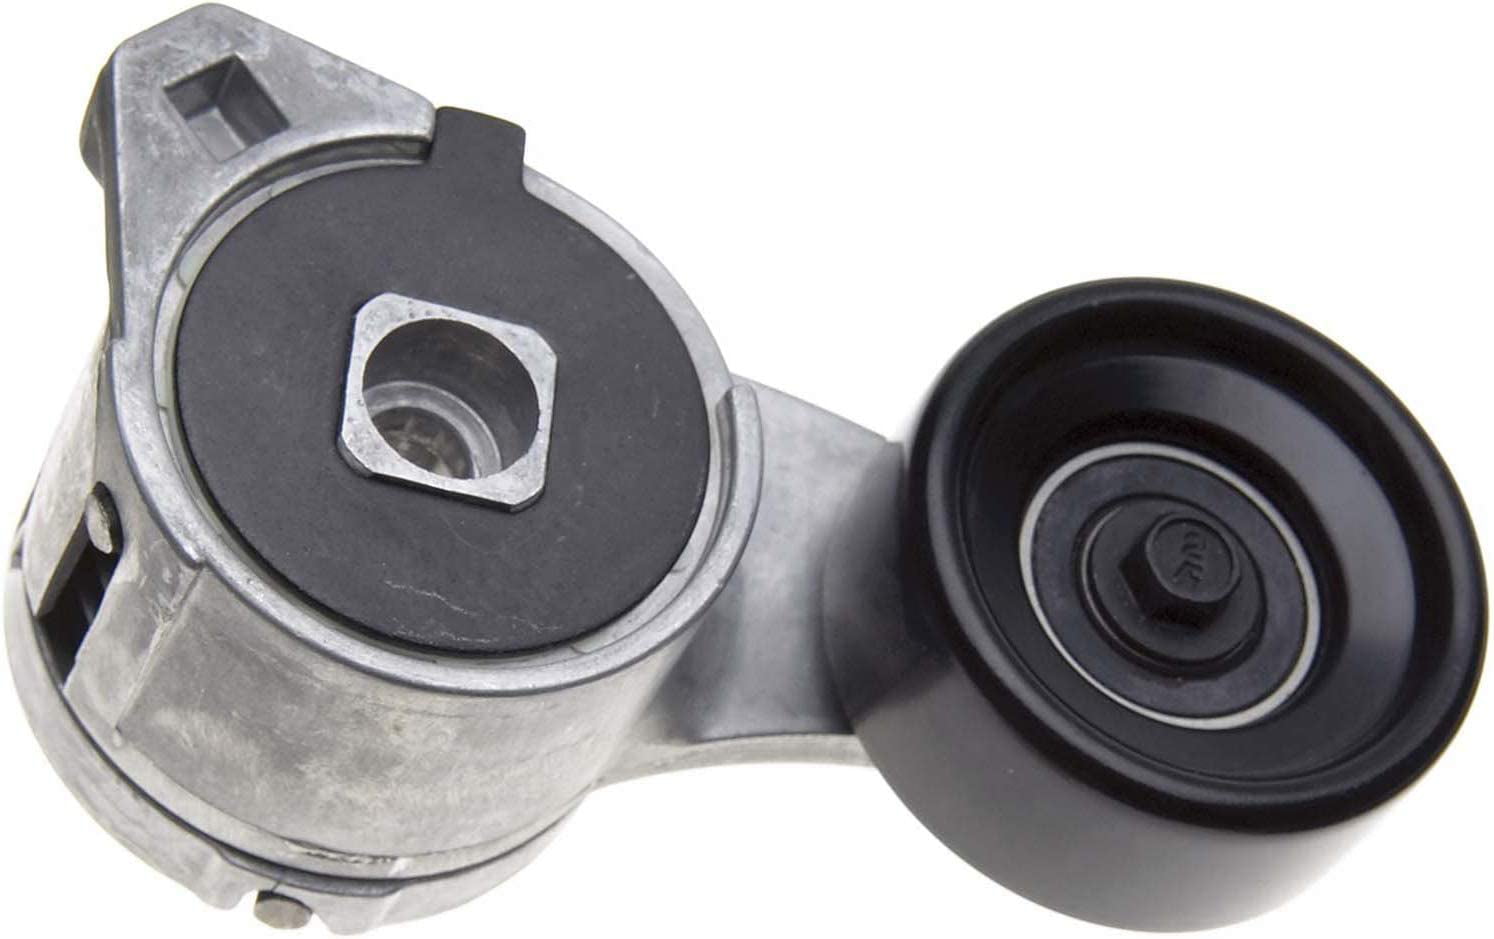 Serpentine Belt Tensioner for Chevy Buick Cadillac Pontiac Oldsmobile